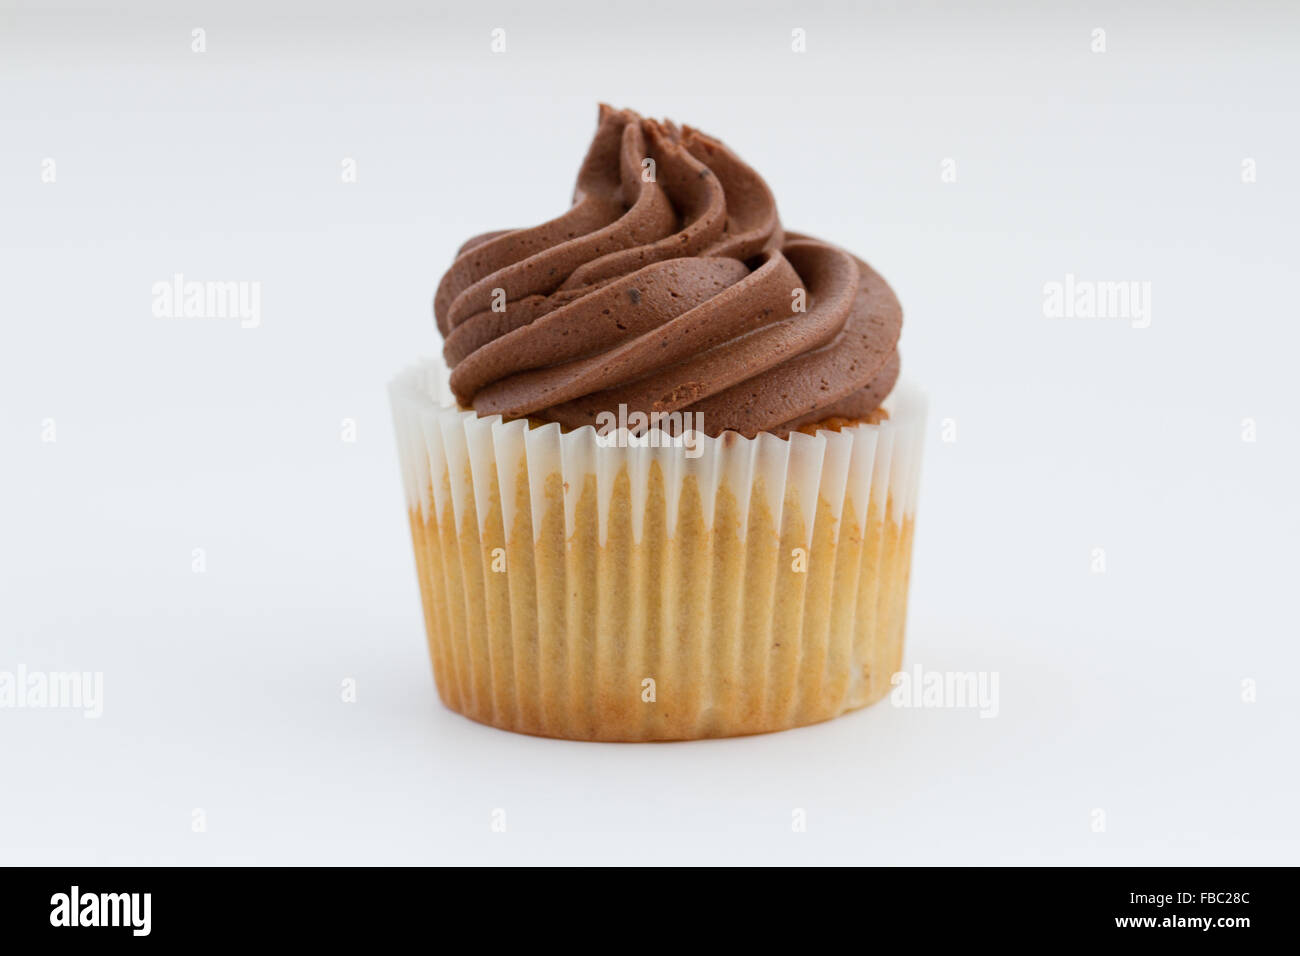 A chocolate cupcake with swirled frosting on an isolated white background. Stock Photo